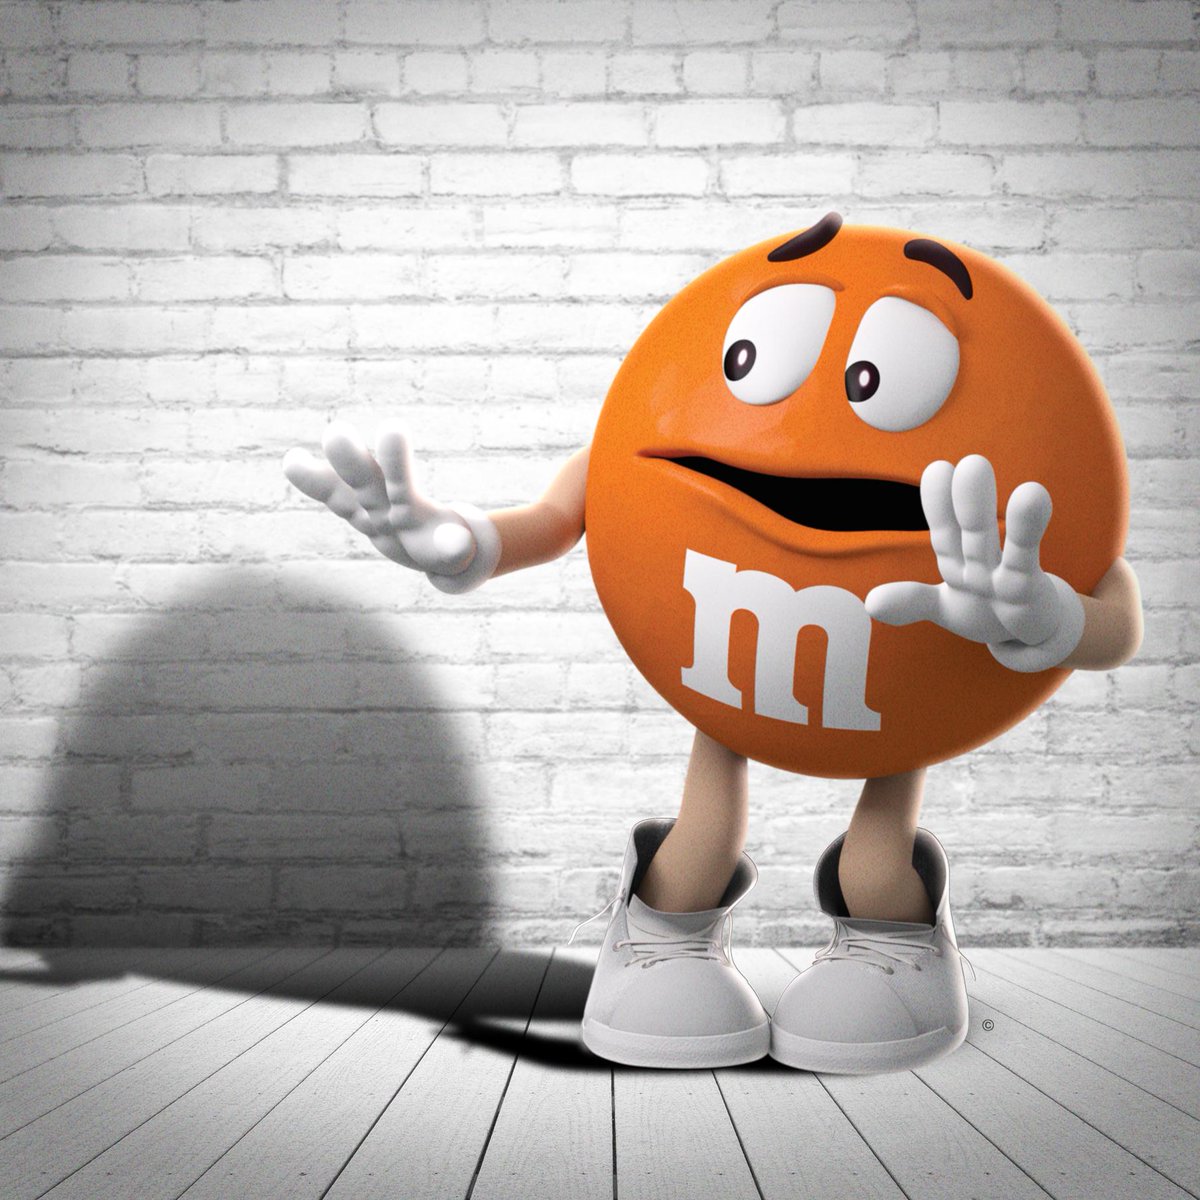 M&M'S on X: It's ok, groundhog. Orange gets scared of his shadow